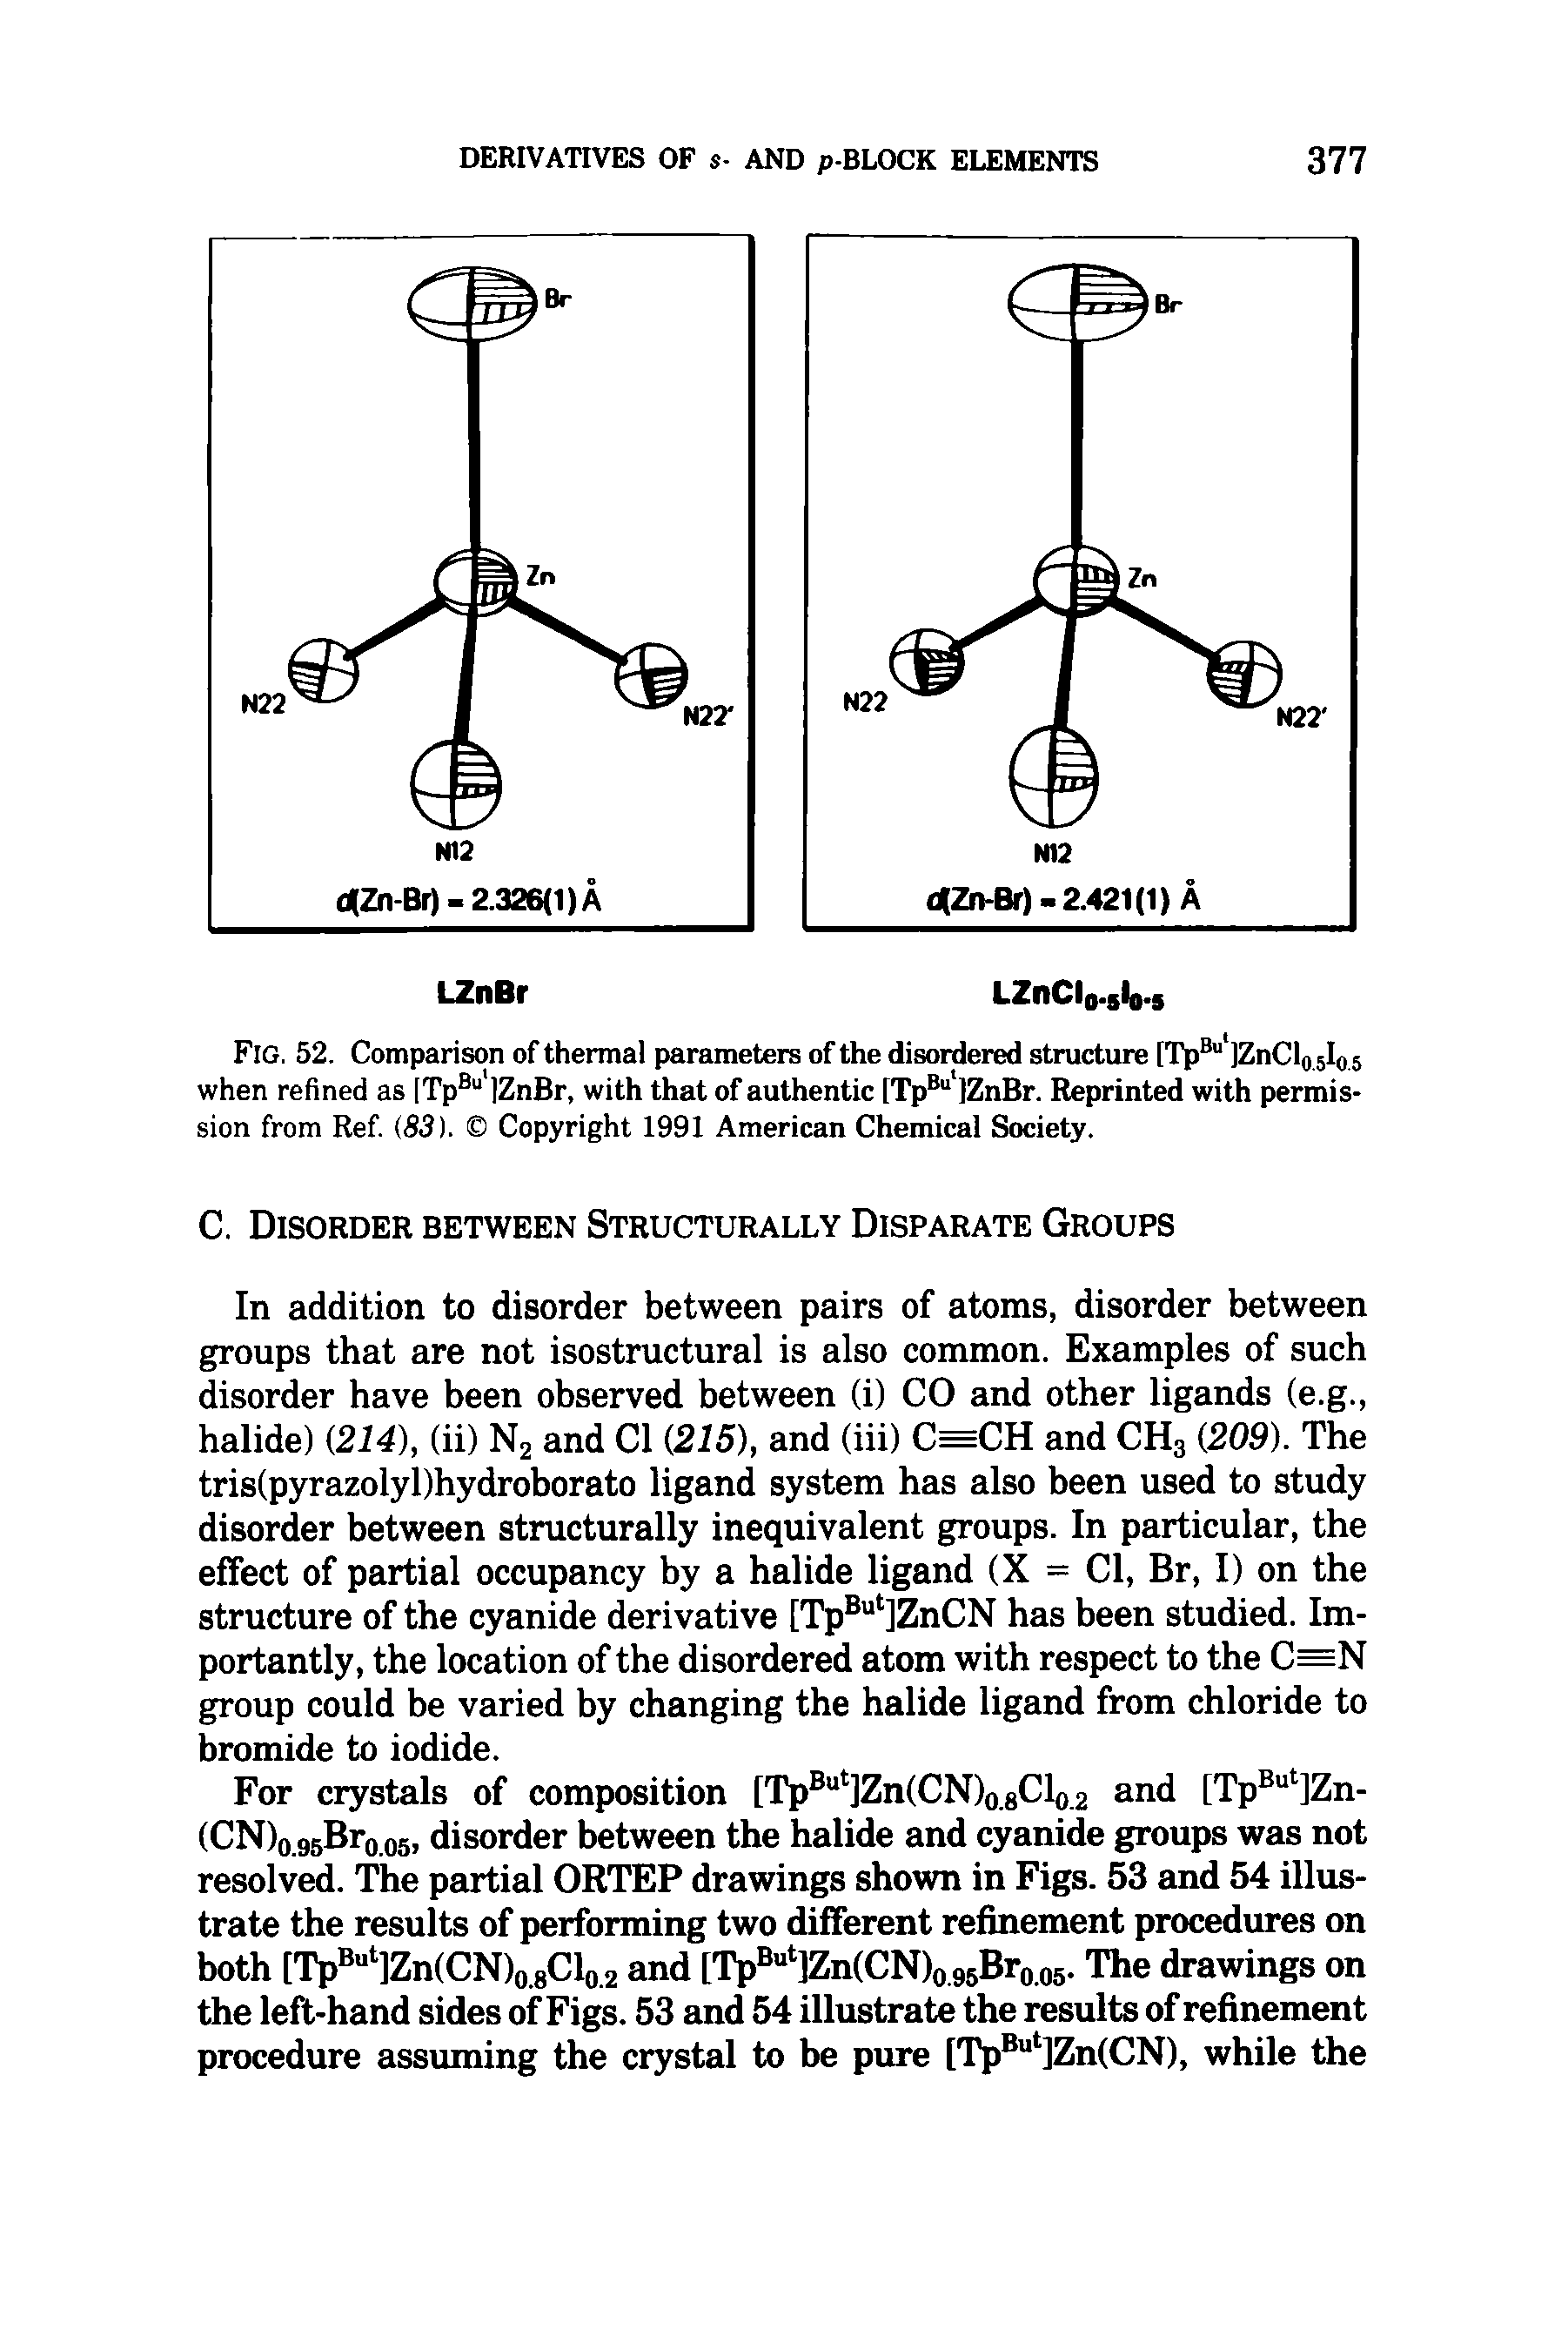 Fig. 52. Comparison of thermal parameters of the disordered structure [TpBu ]ZnClo,5Io 5 when refined as [TpBu lZnBr, with that of authentic [TpB IZnBr. Reprinted with permission from Ref. (83). Copyright 1991 American Chemical Society.